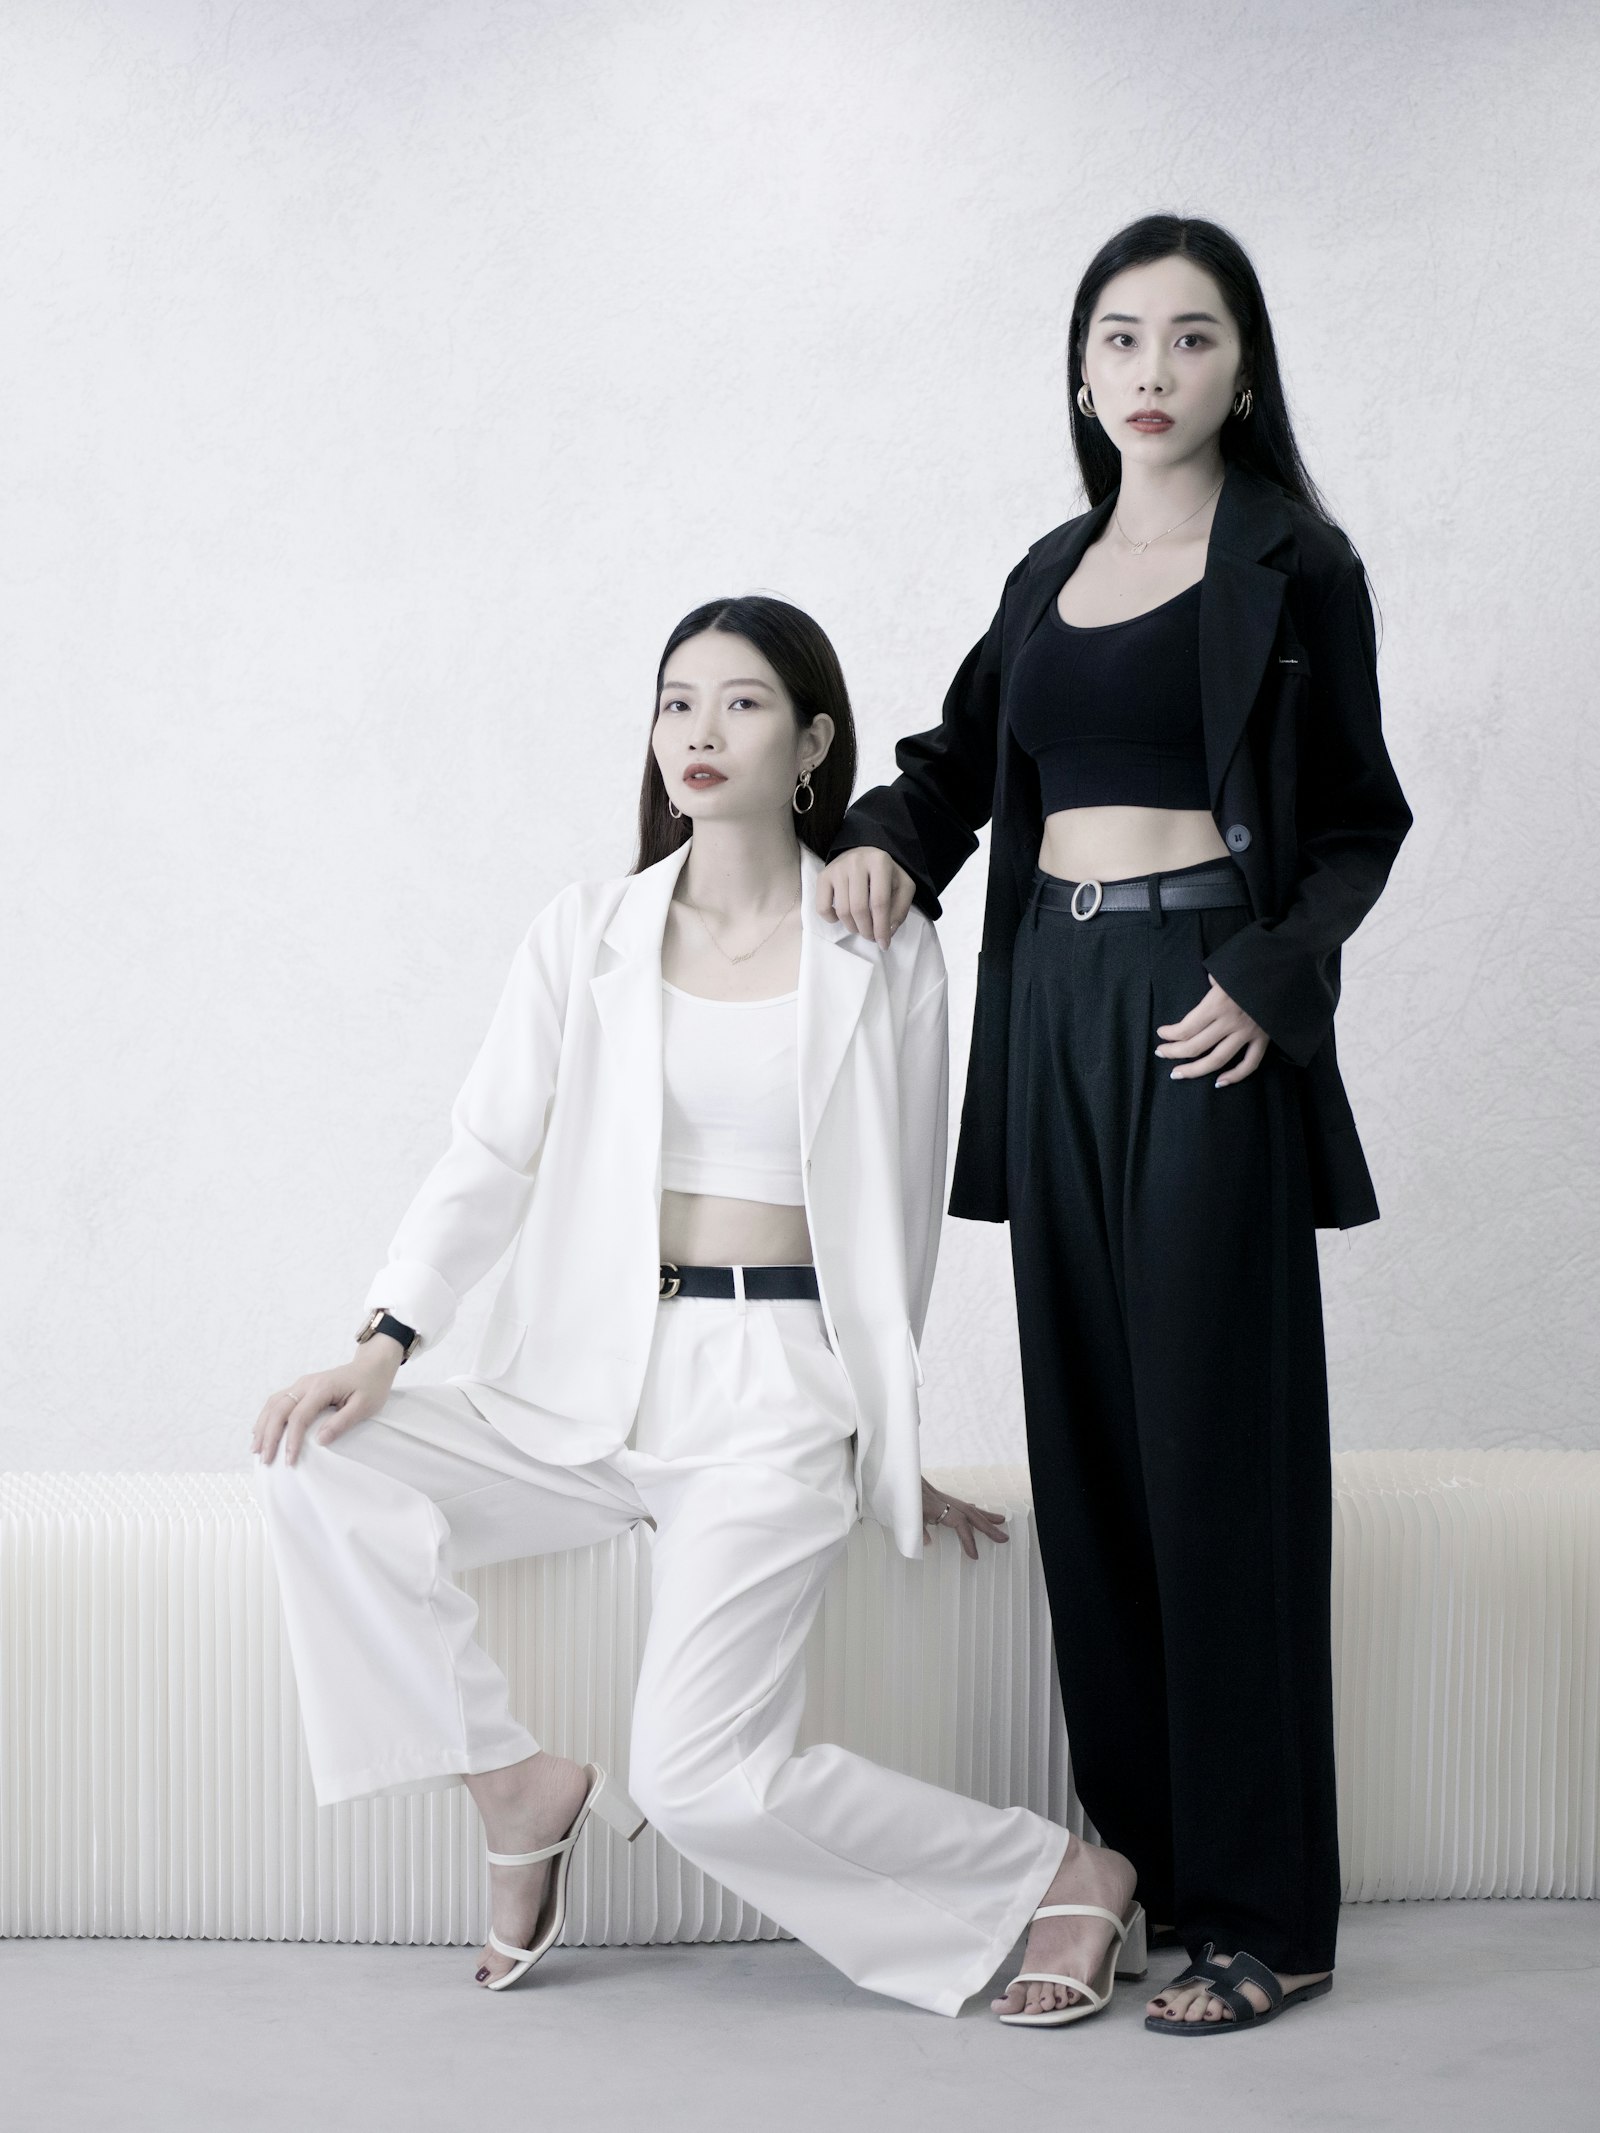 Hasselblad X1D-50c sample photo. 2 women in white photography